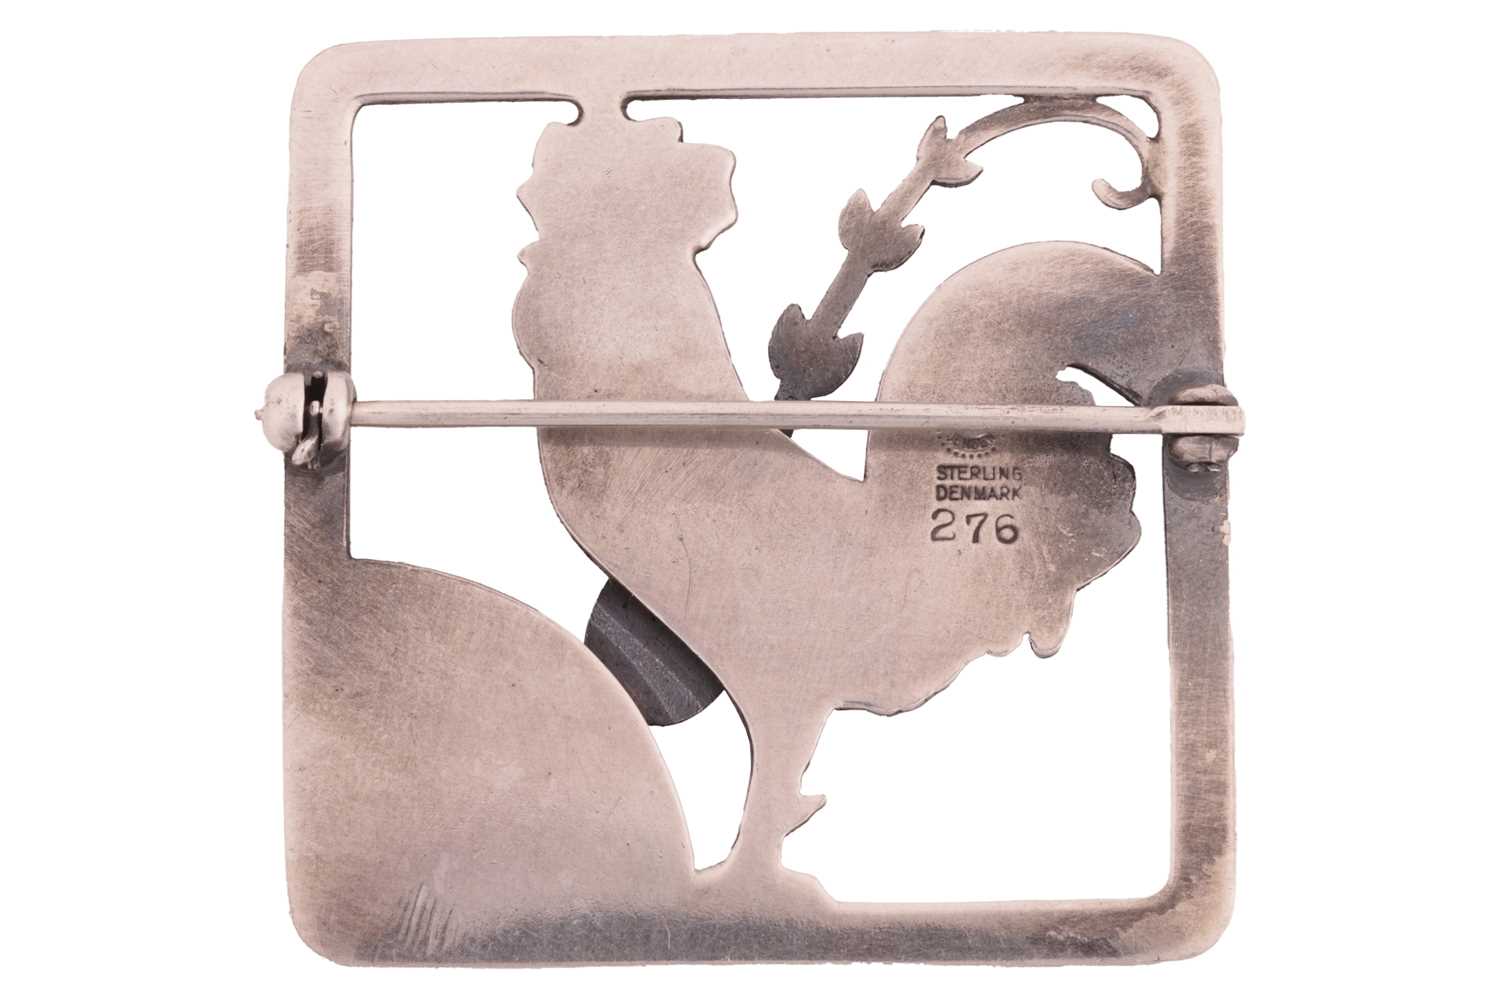 Georg Jensen - A cockerel brooch, depicting a cockerel with fern accent in a square frame, with hing - Image 2 of 3